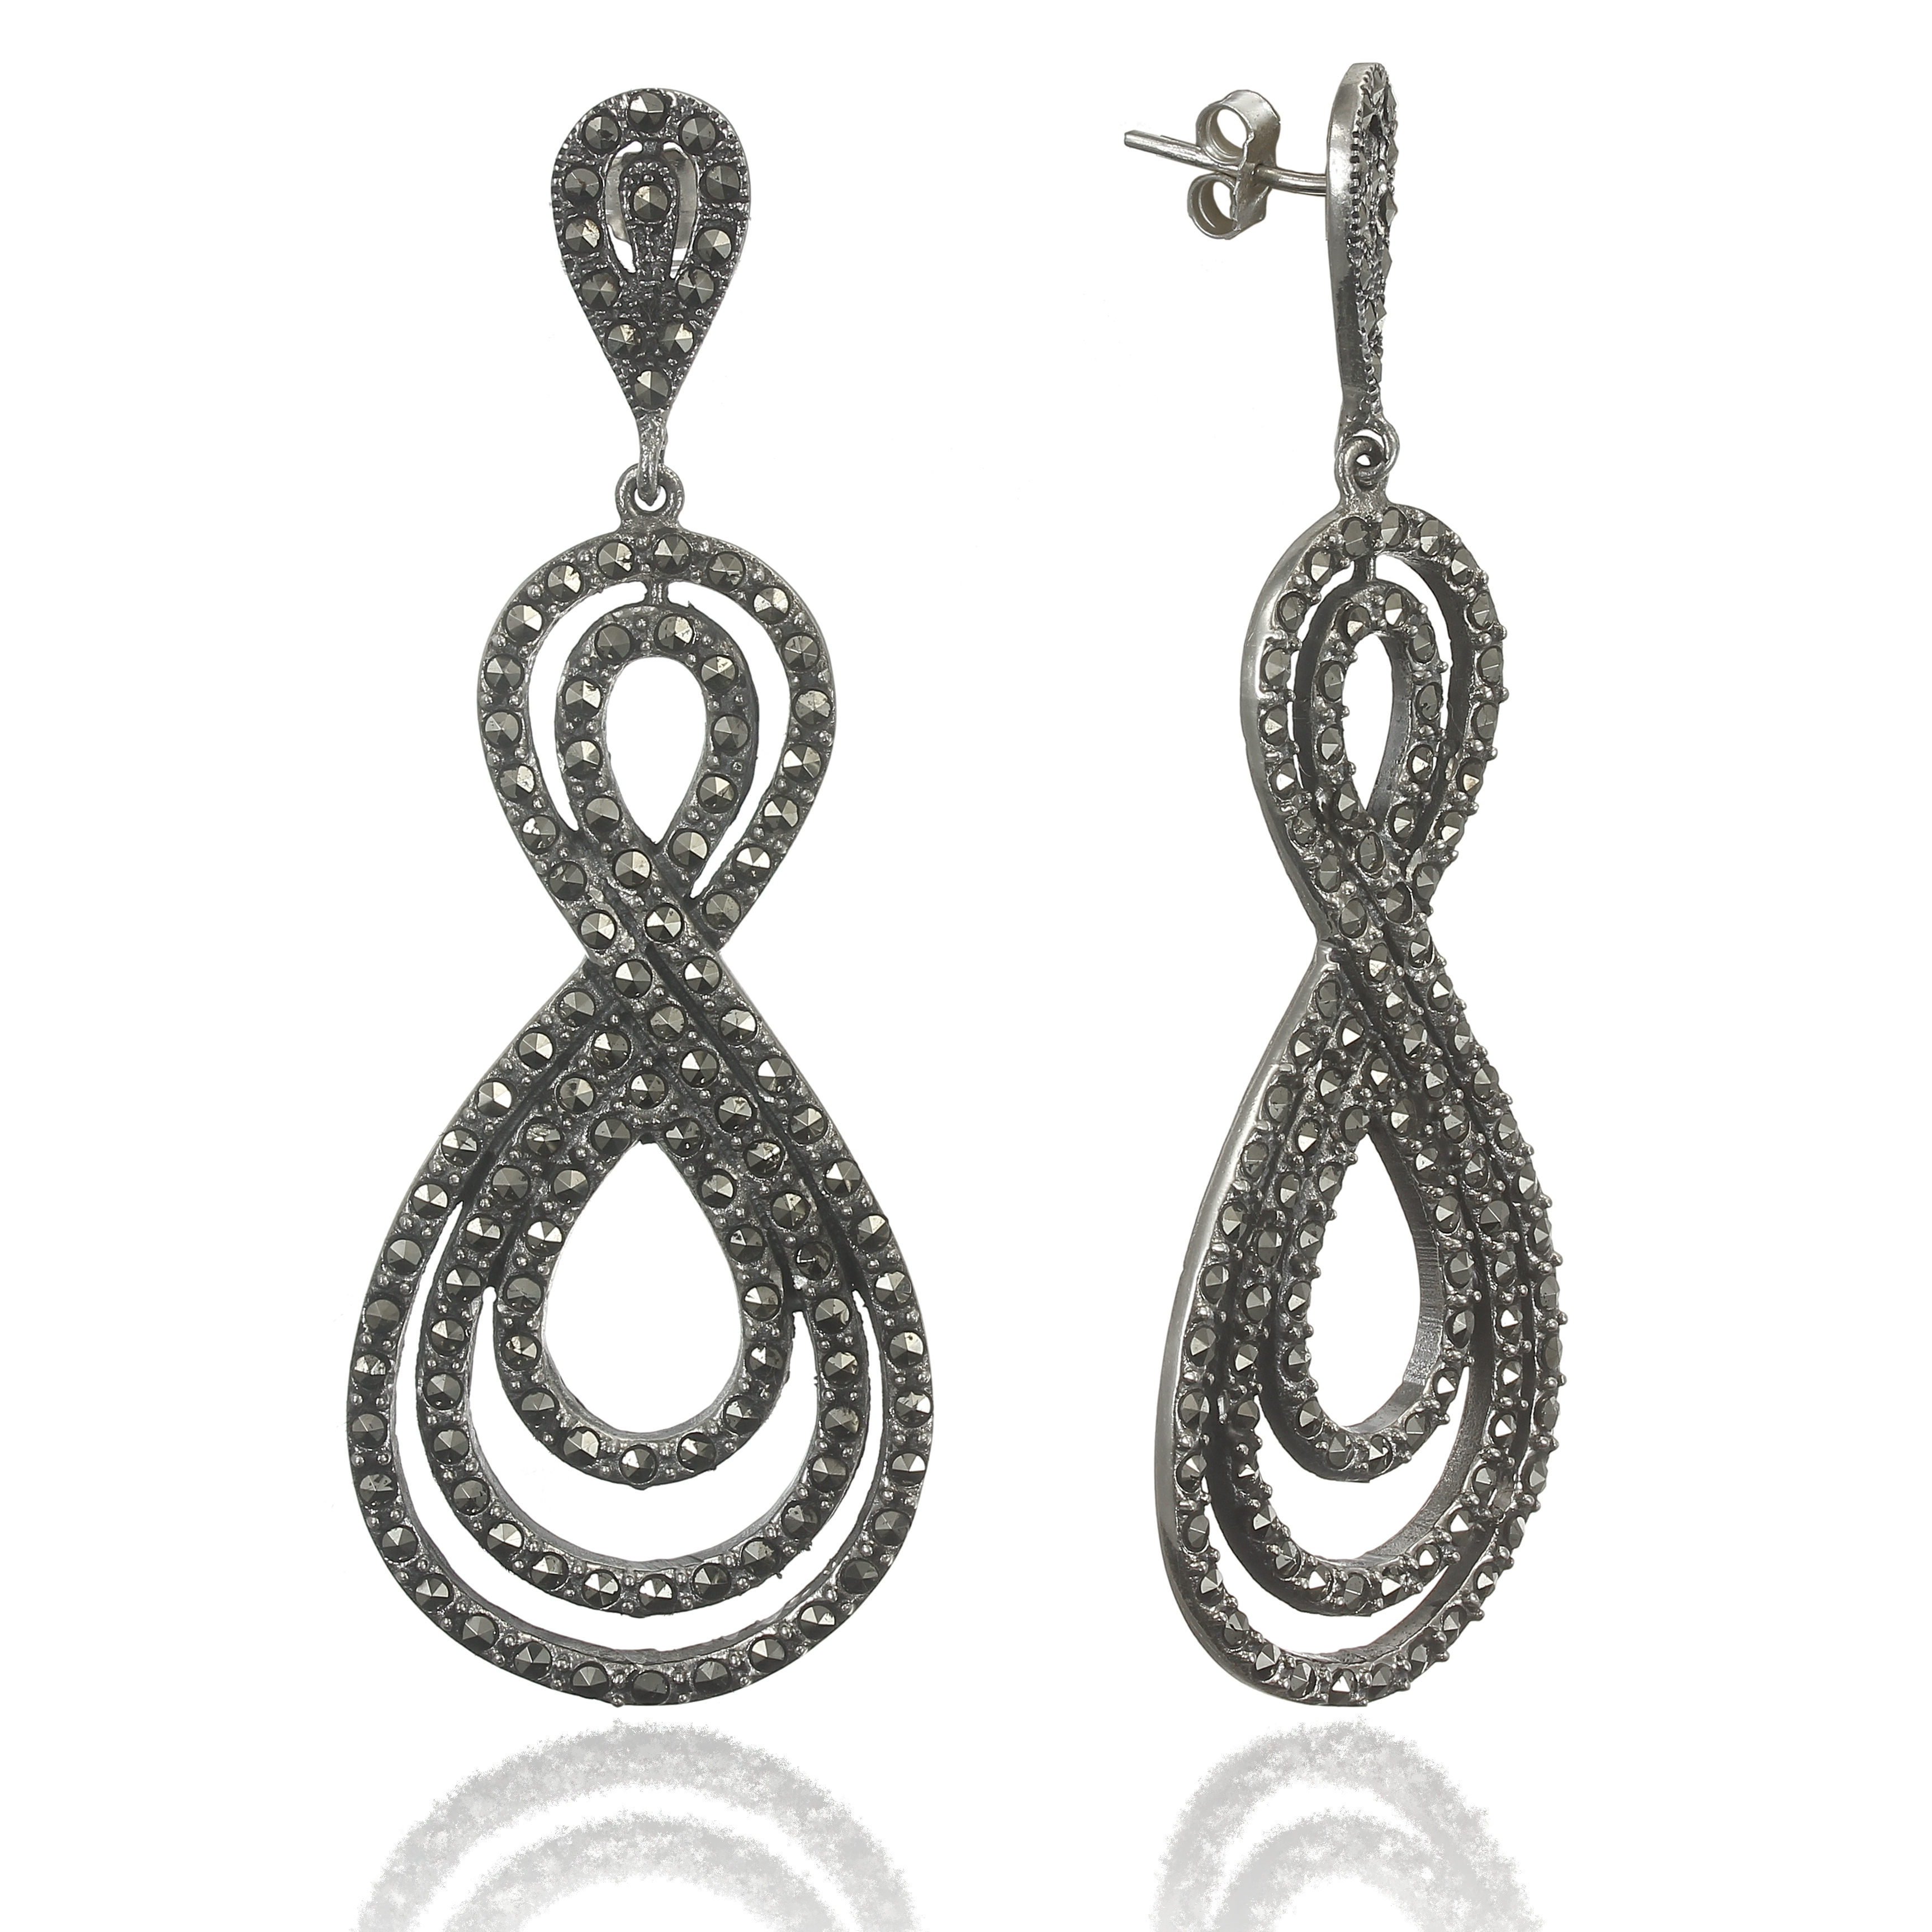 Silver earrings with marcasite stones.